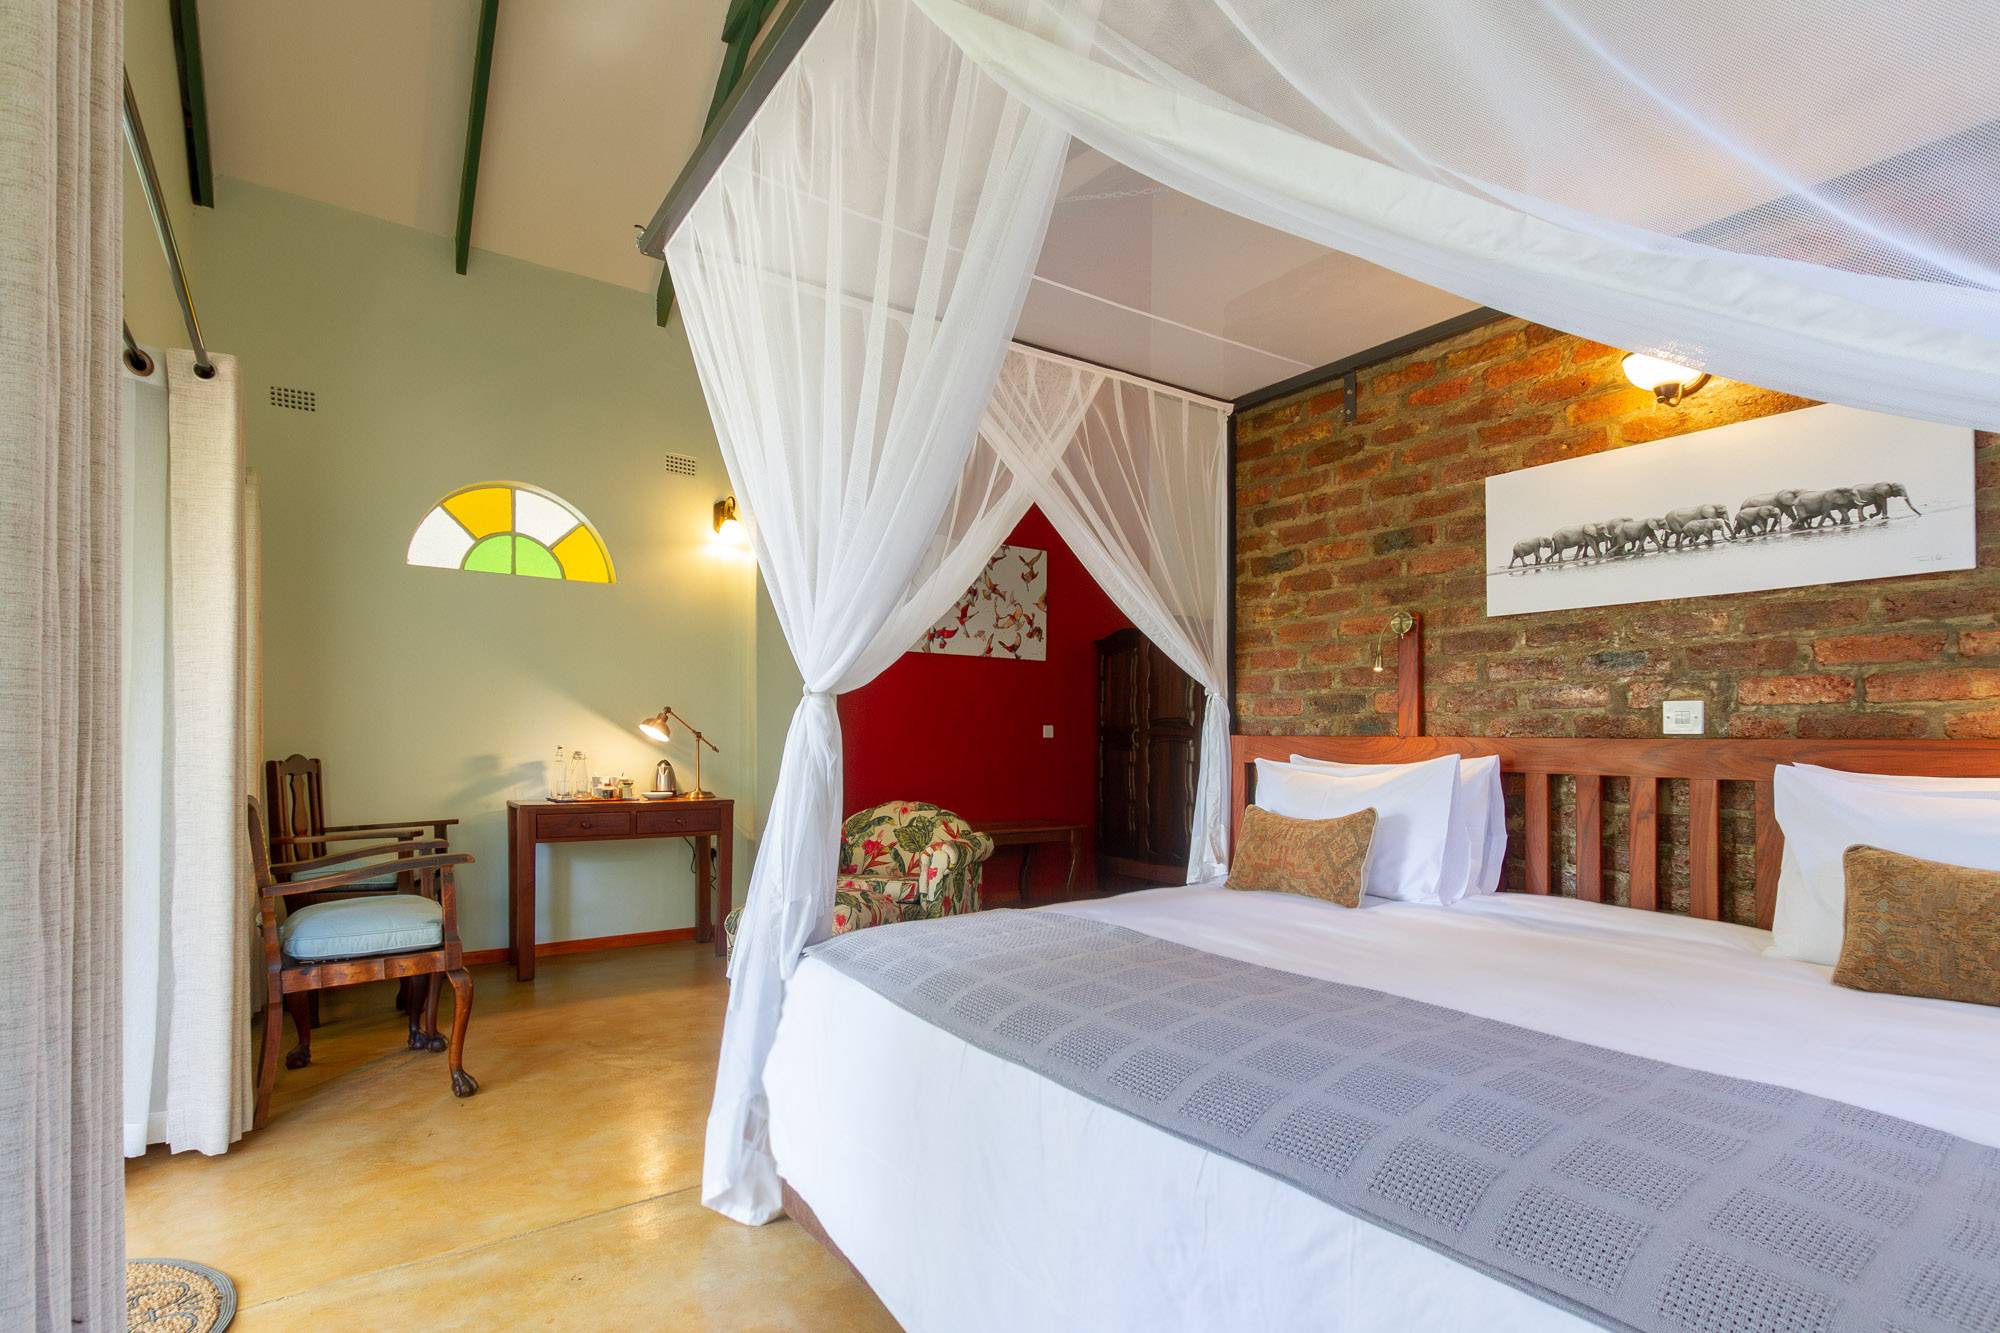 Room 1 with extra large king size bed at The Courtney Lodge